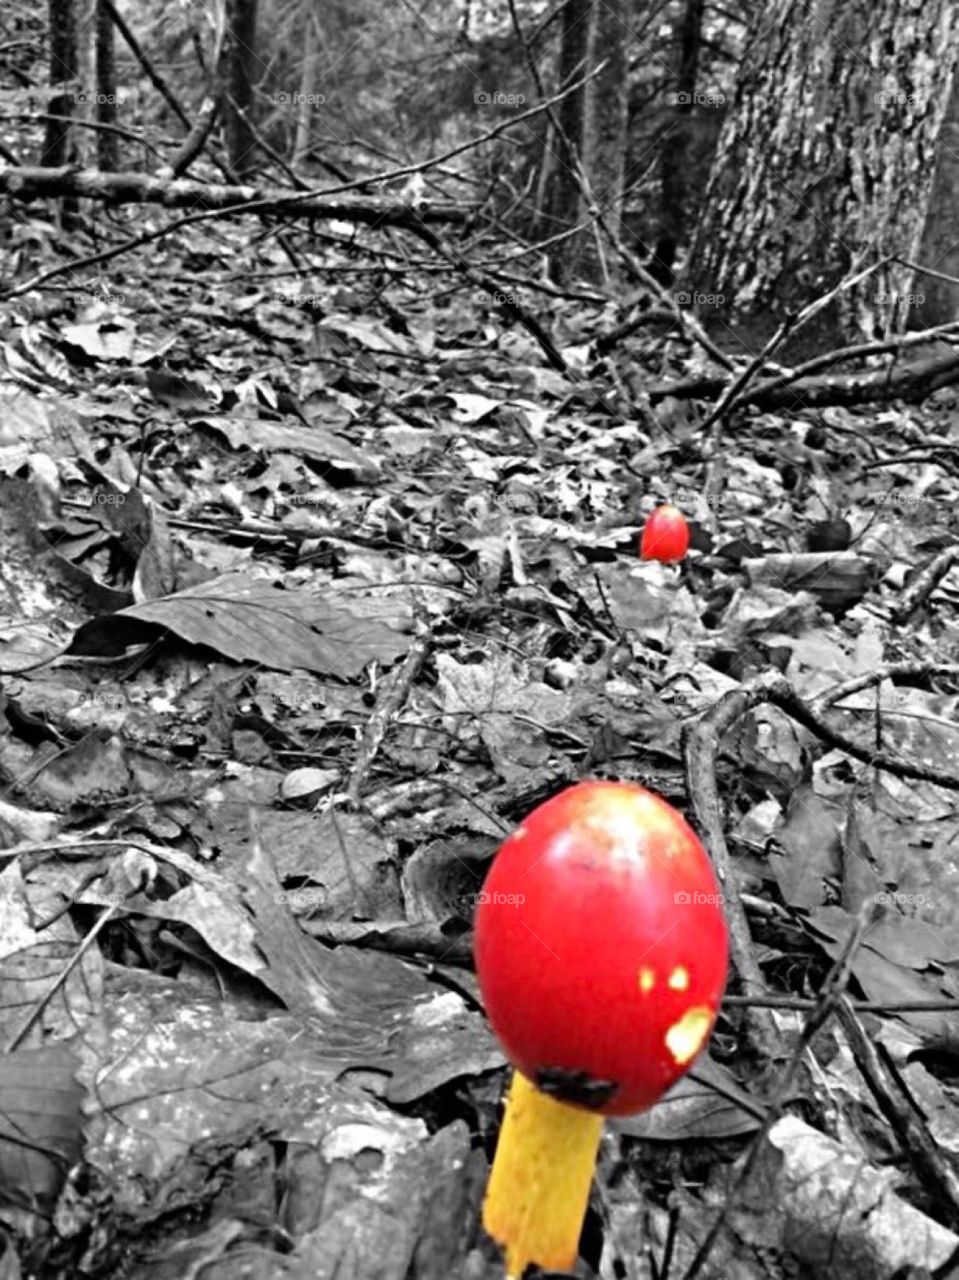 Black and white with red mushrooms